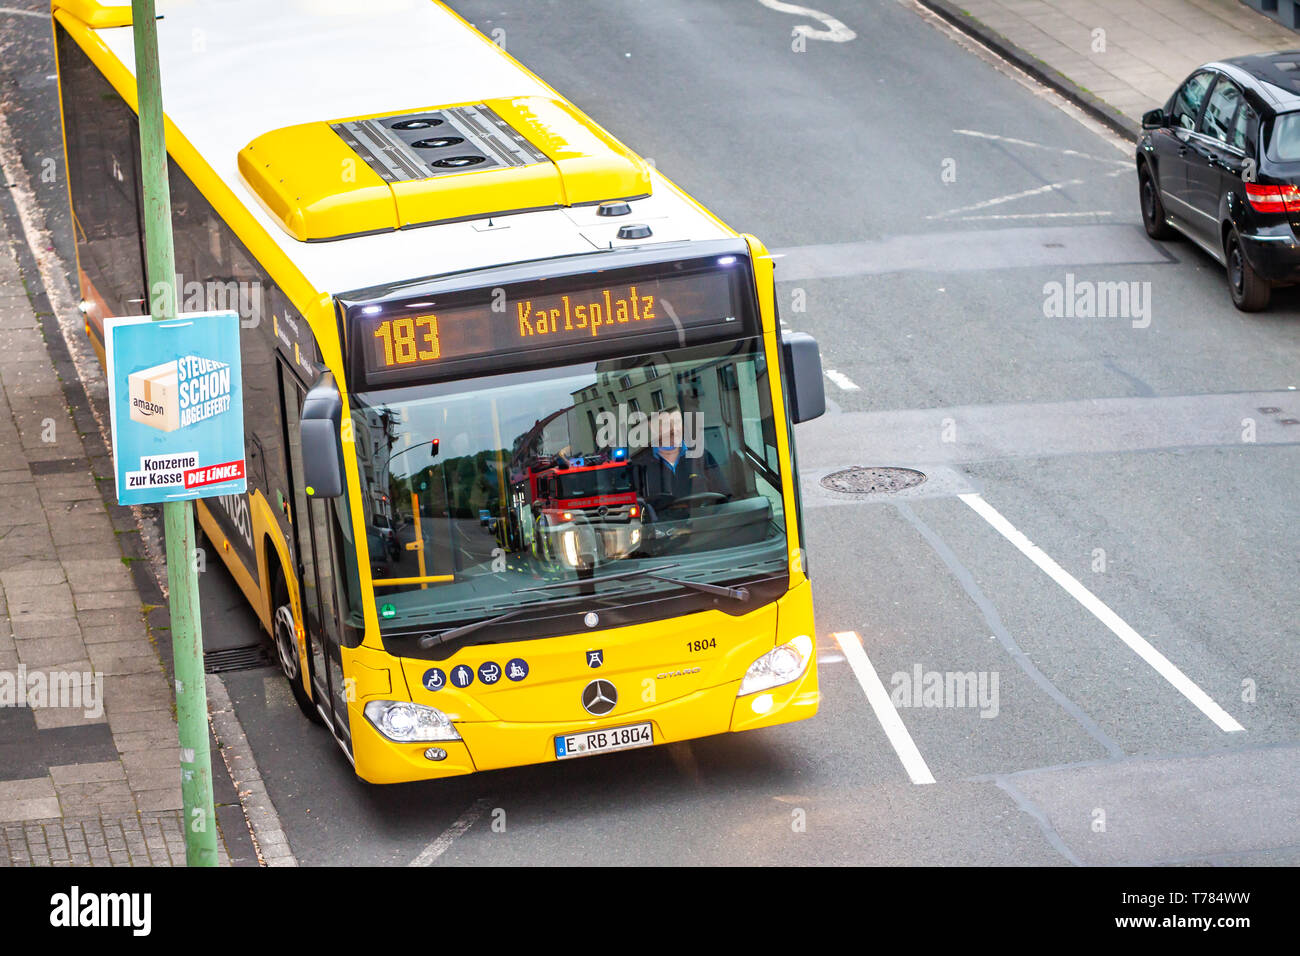 Articulated Bus Germany High Resolution Stock Photography and Images - Alamy